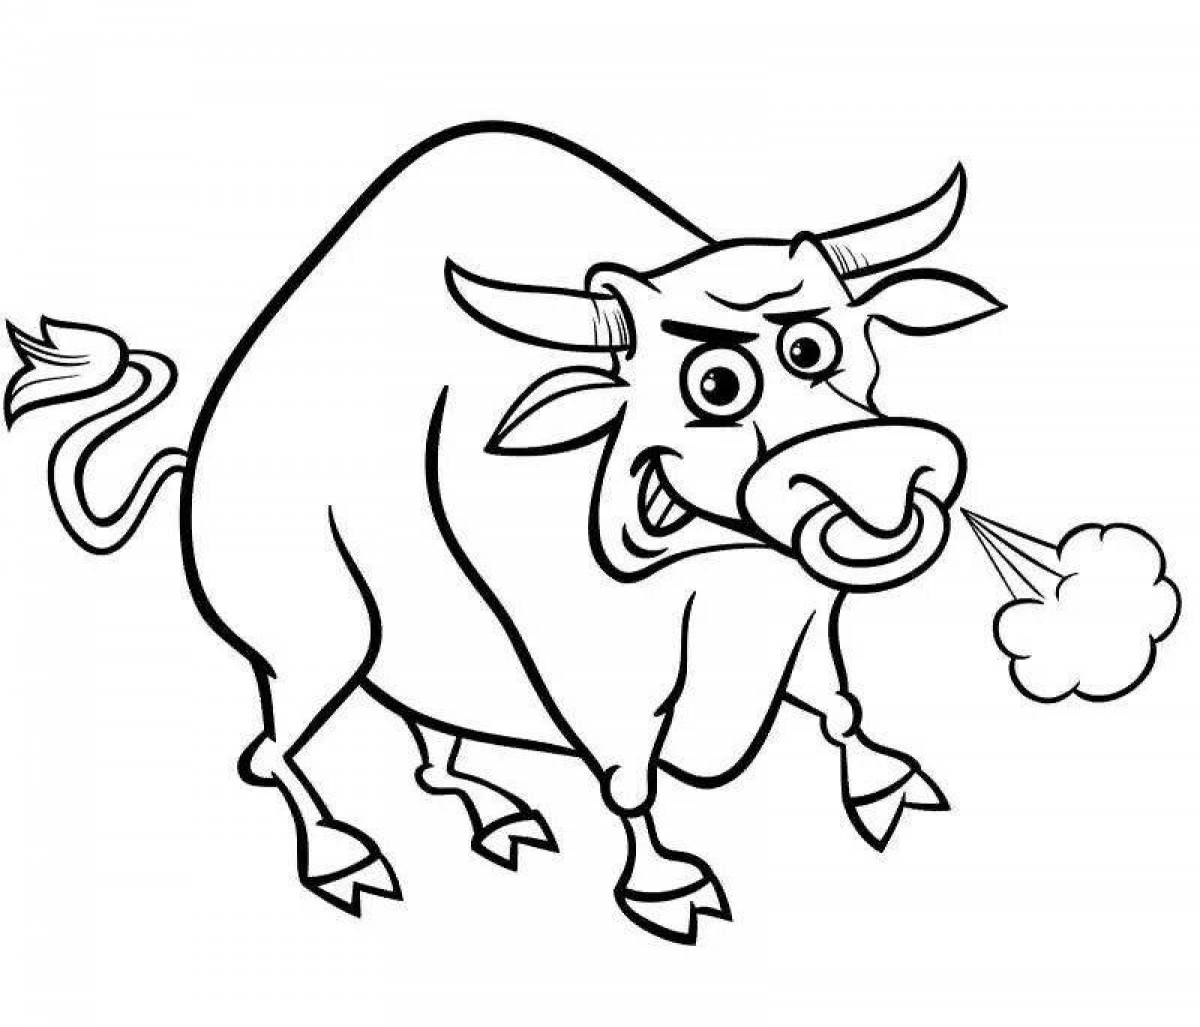 Witty bull coloring page for kids